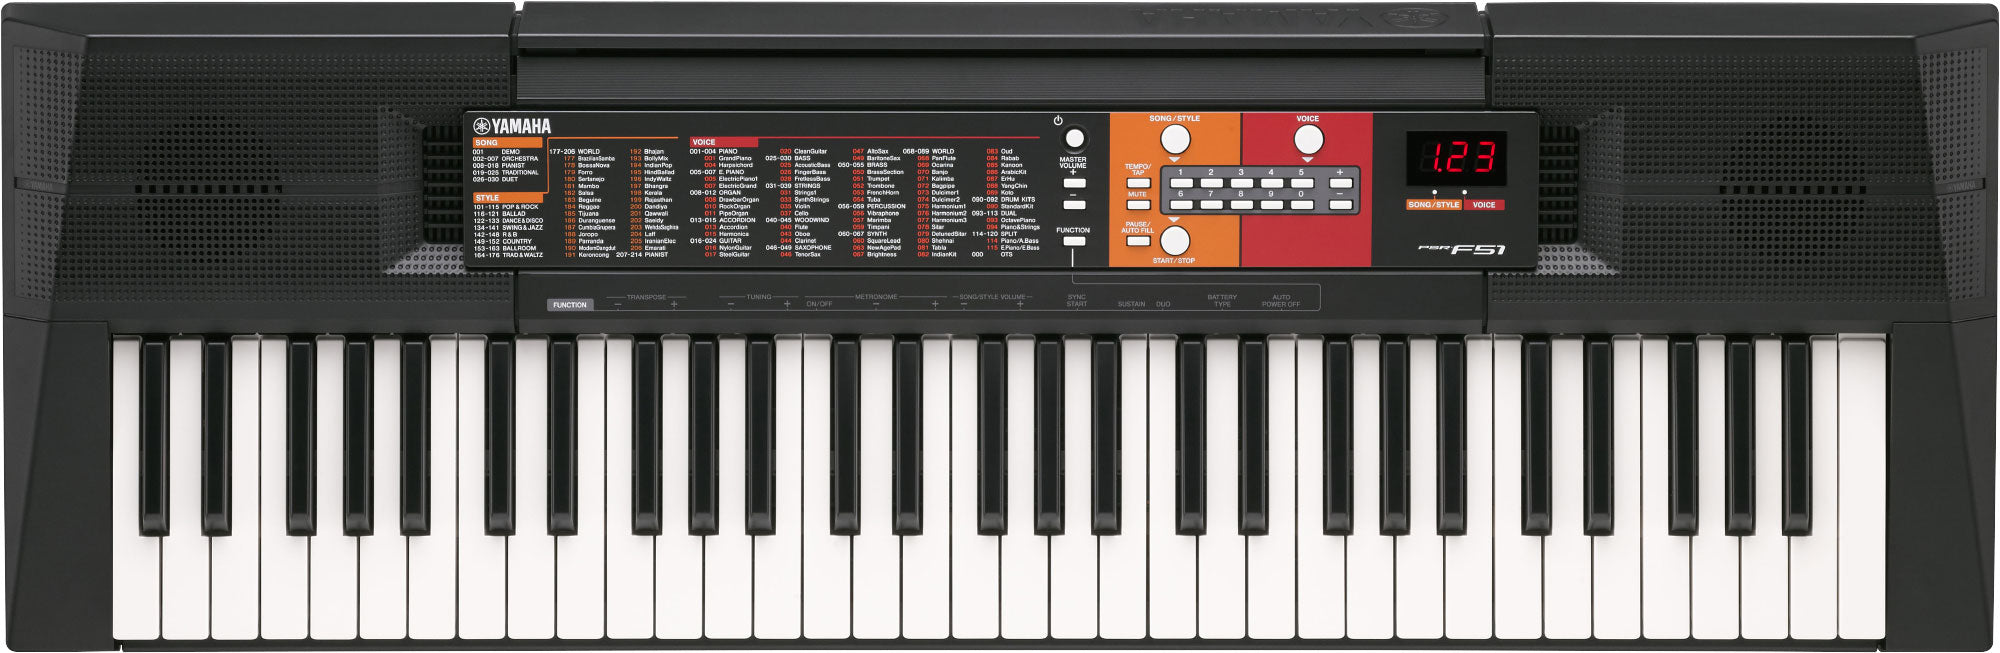 Evaluable Desventaja Analítico Yamaha PSR-E263 61 Key Portable Keyboard Yamaha Portable Keyboards  PSR-E26361-key, entry-level Portable Keyboard featuring a wide variety of  sounds and functions the PSR-E263 is an ideal first keyboard for aspiring  musicians who